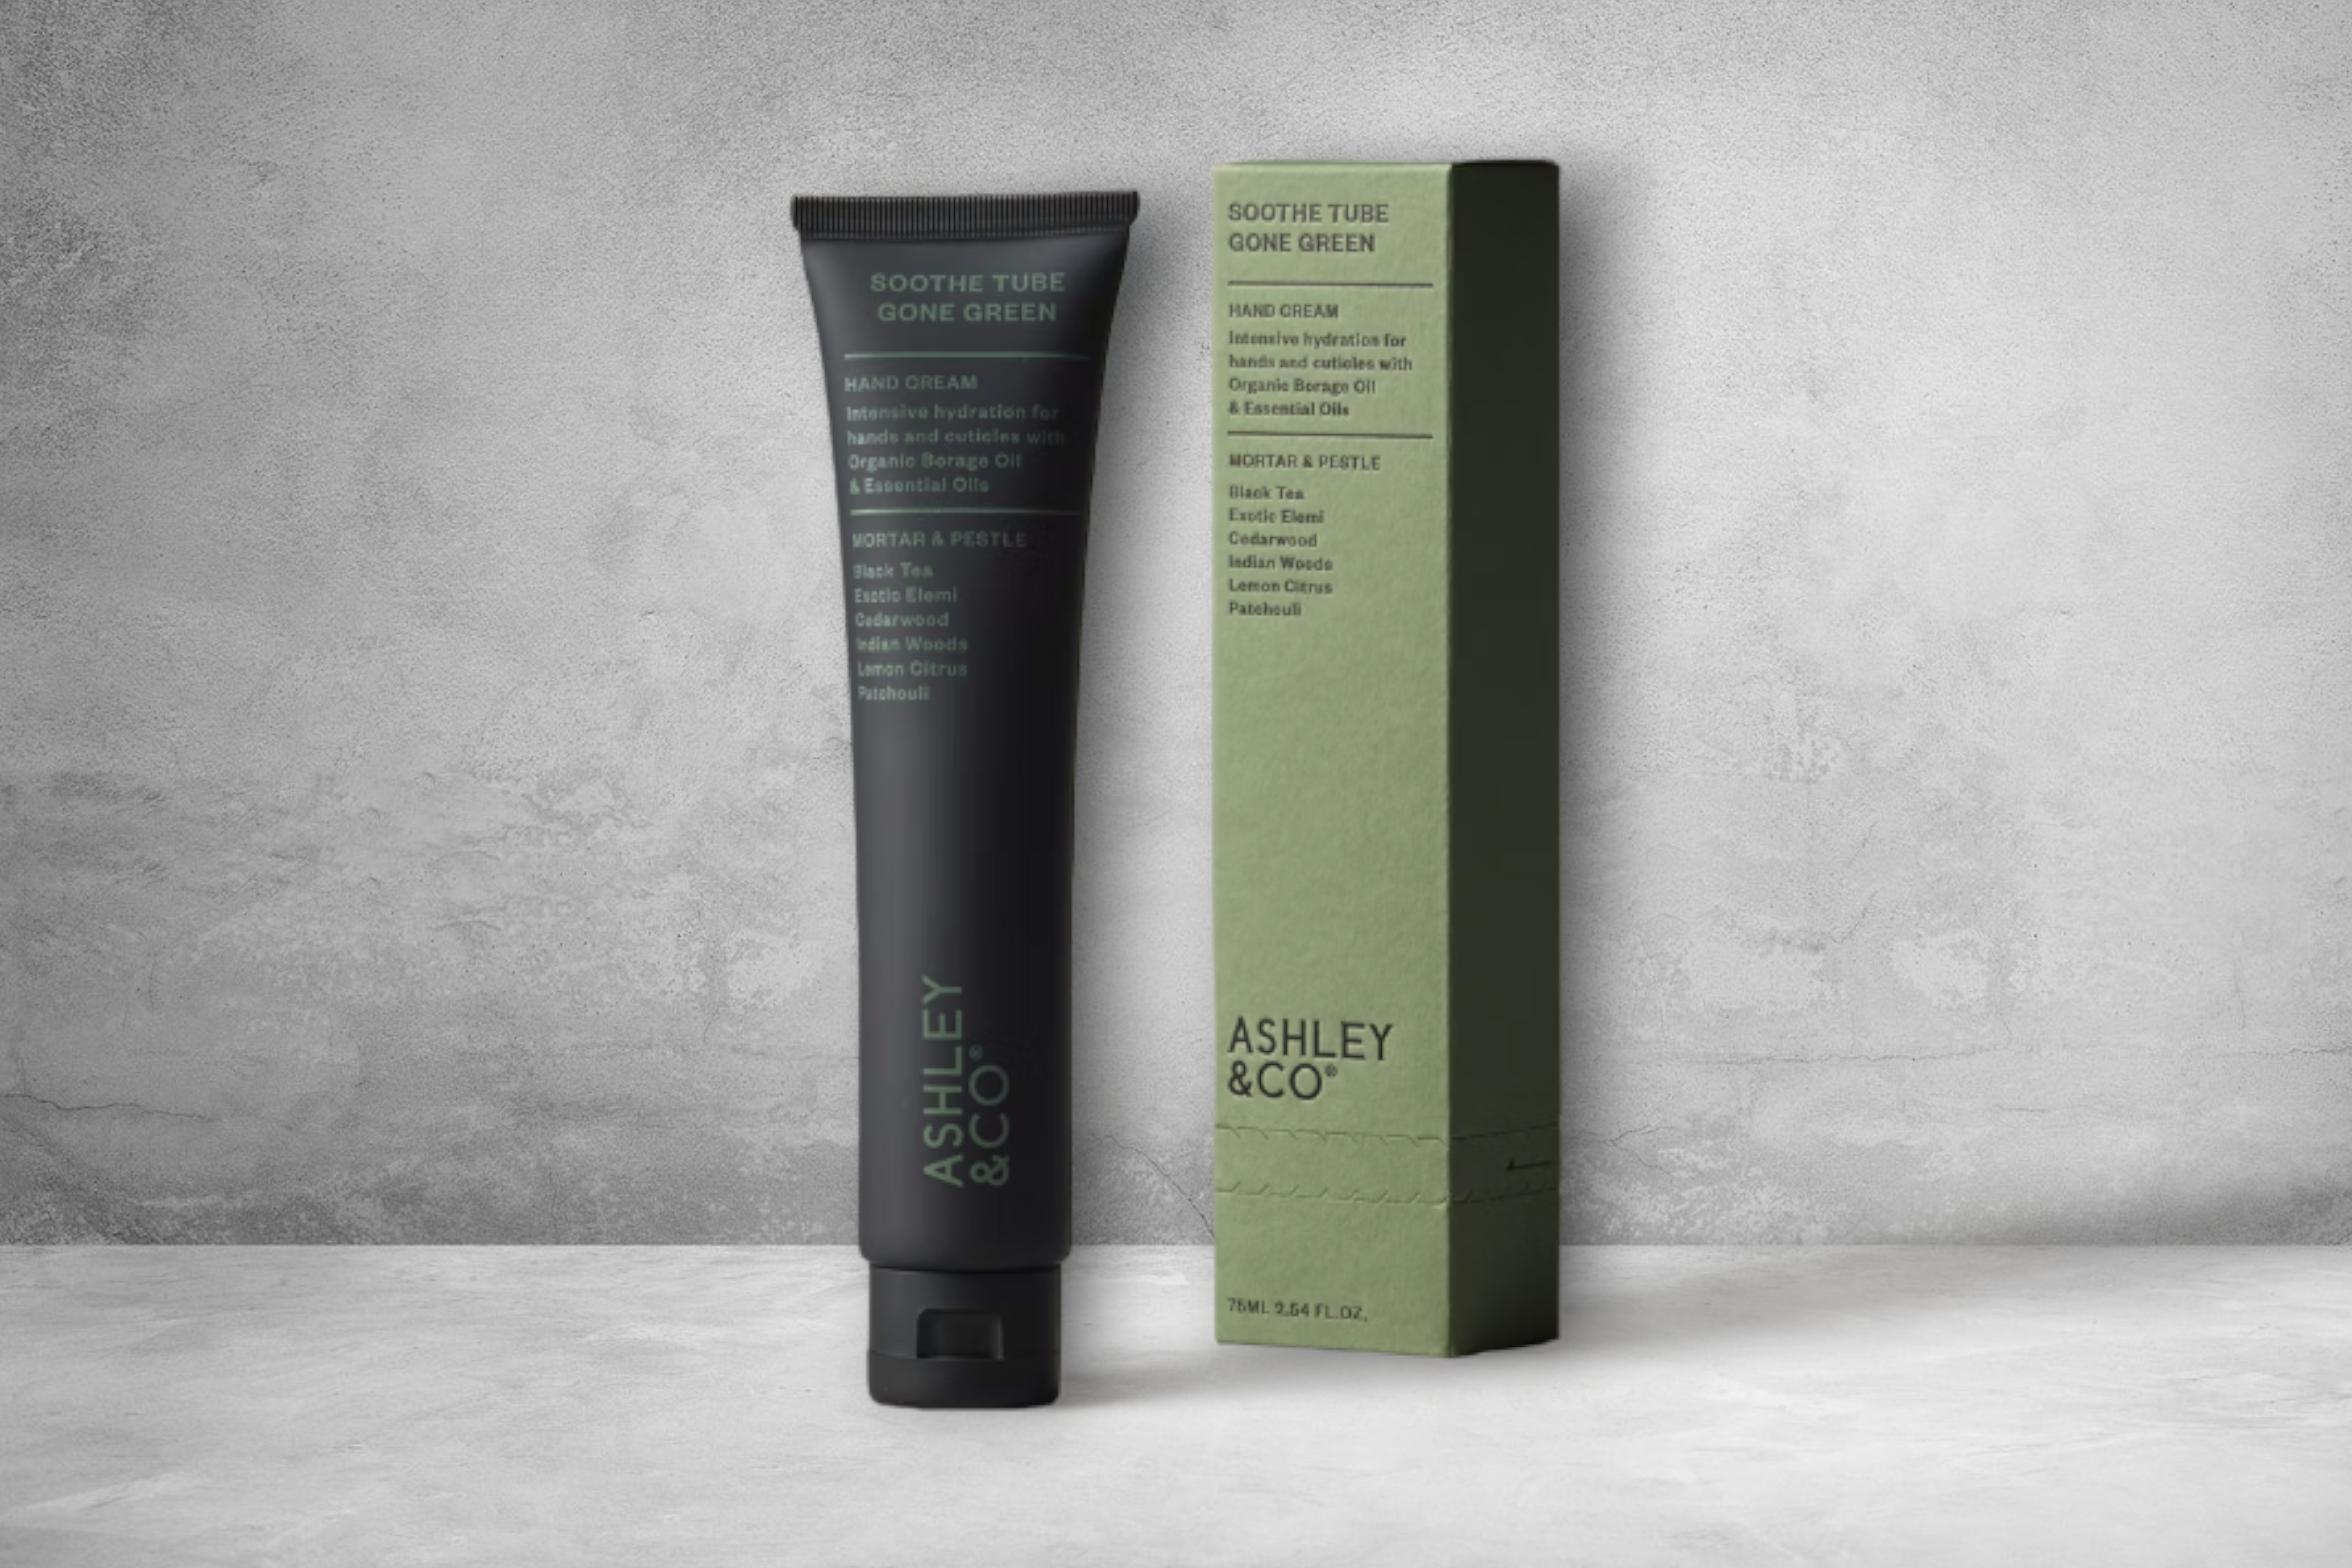 Ashley & Co gone green soothe tube hand cream